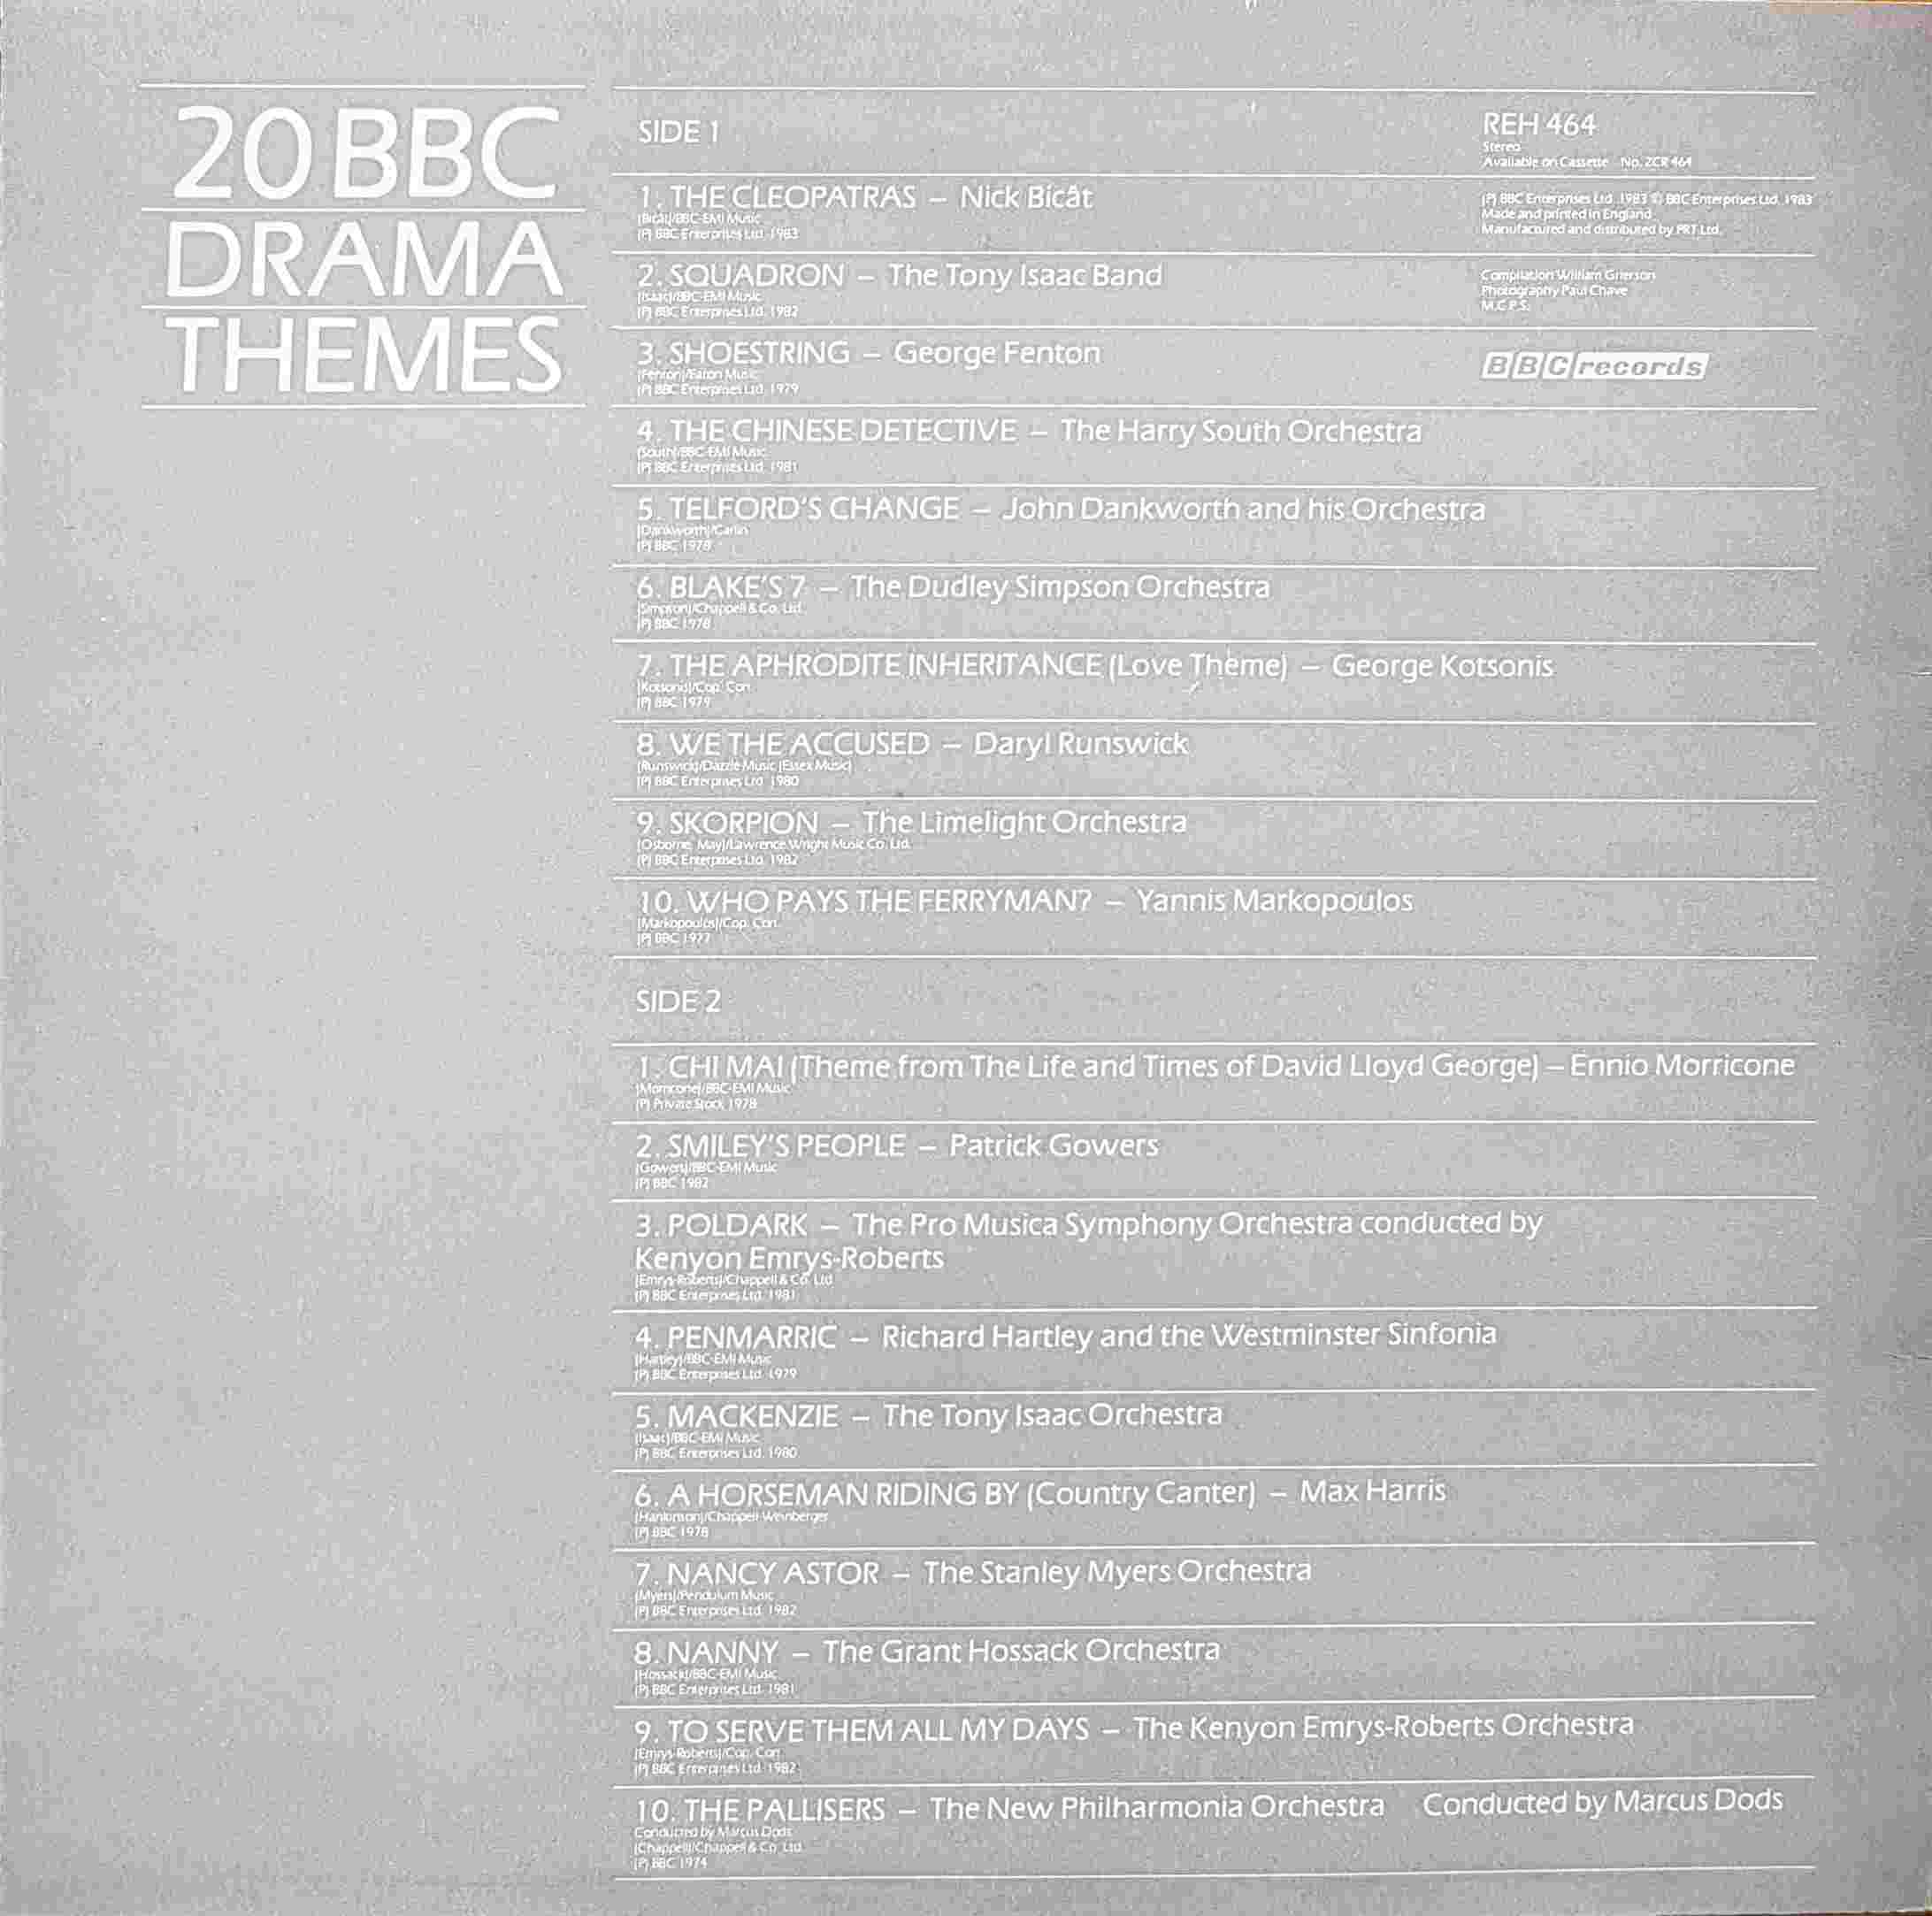 Picture of REH 464 20 BBC drama themes by artist Various from the BBC records and Tapes library